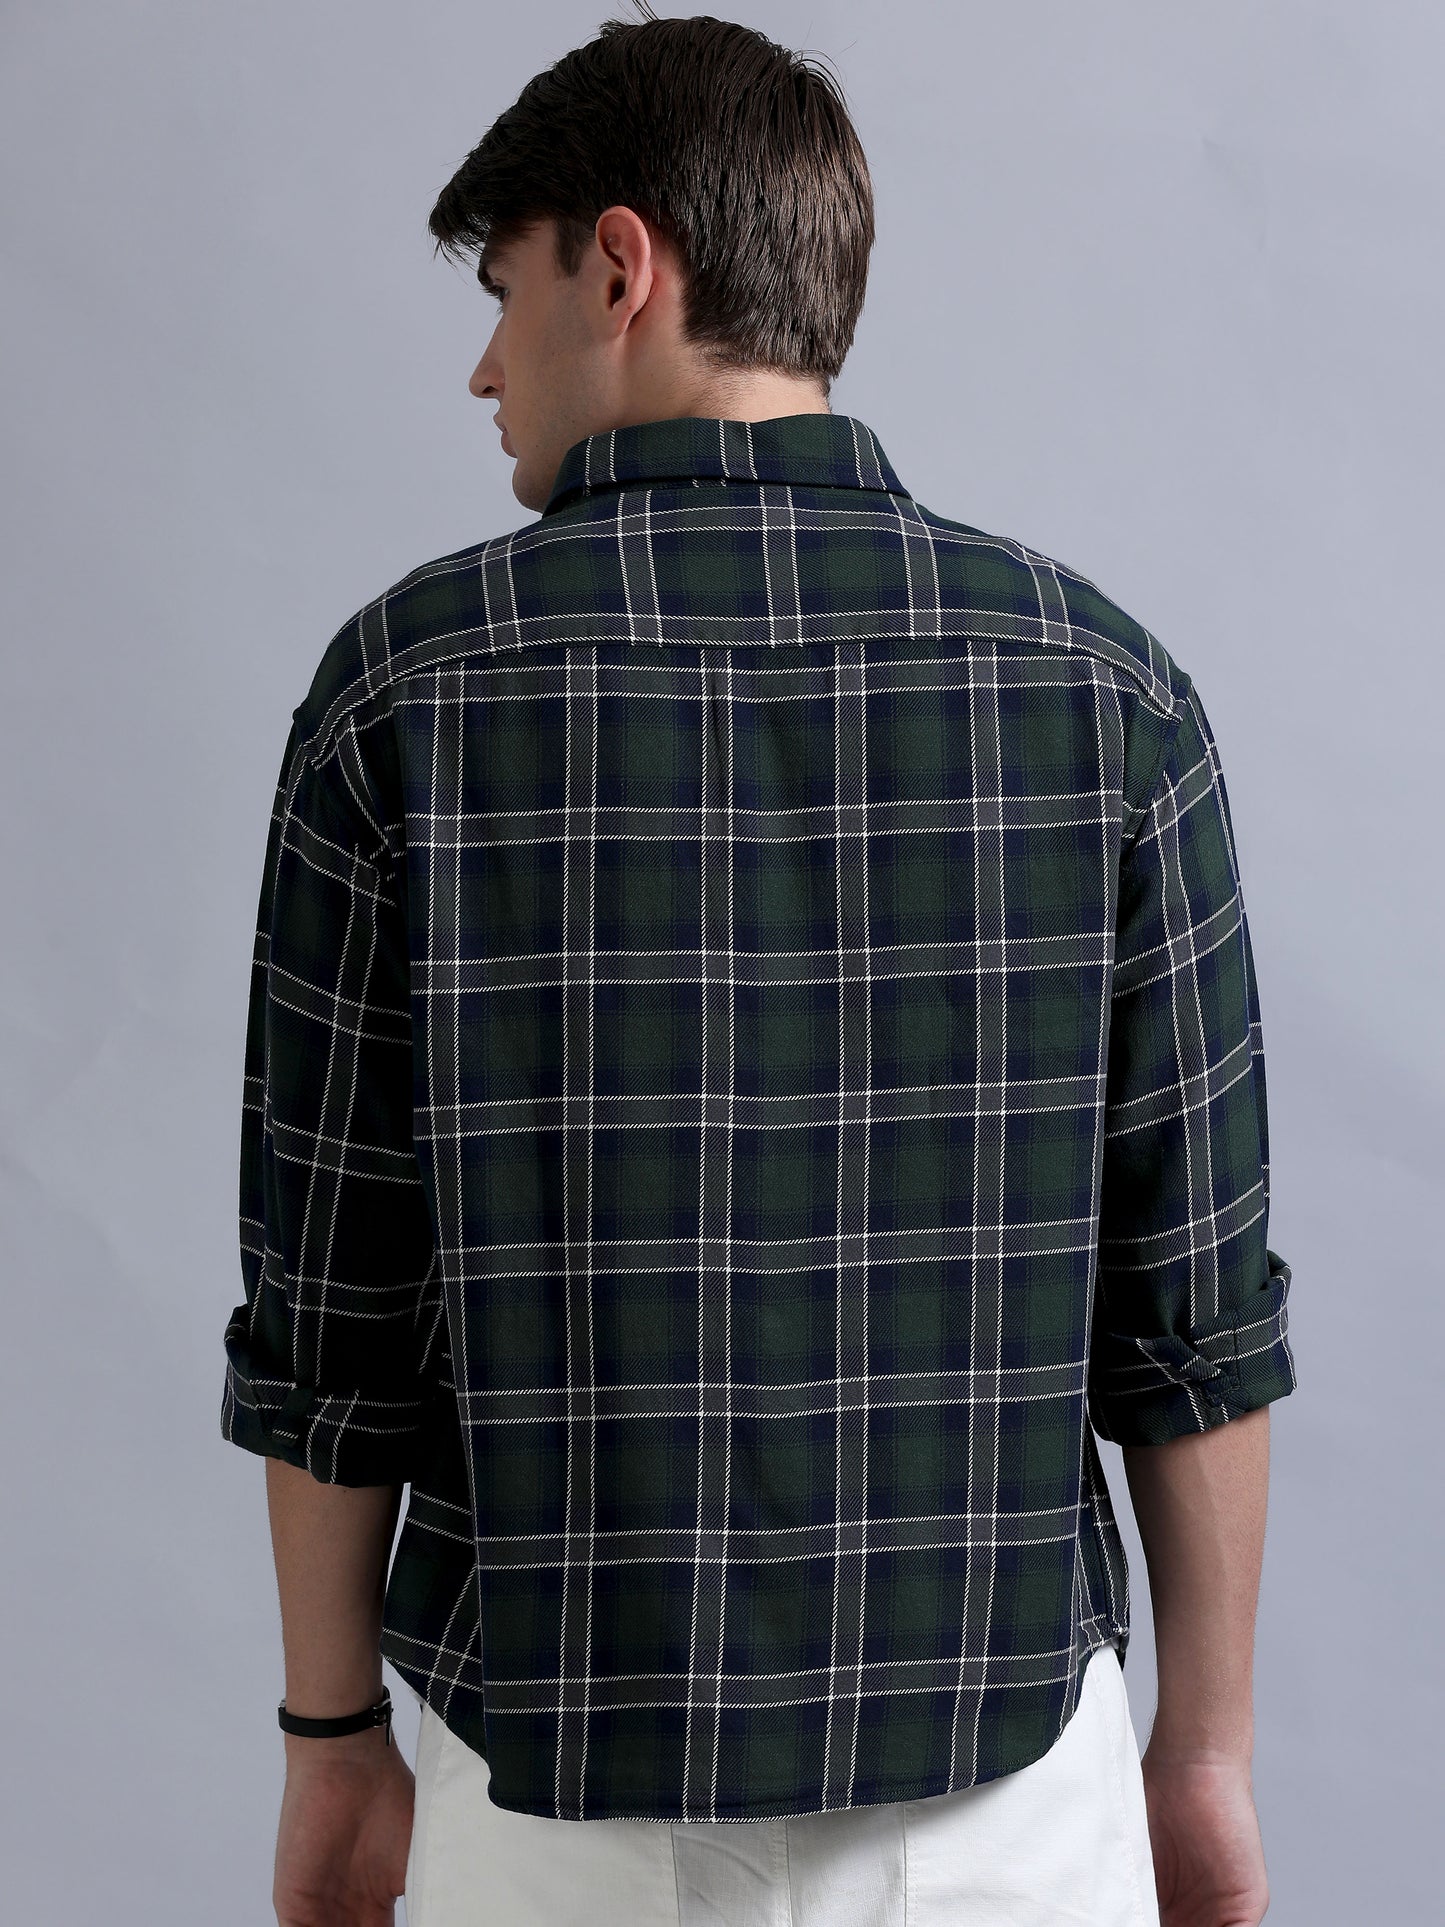 Premium Men Shirt, Relaxed Fit, Yarn Dyed Flannel Check, Pure Cotton, Full Sleeve, Green